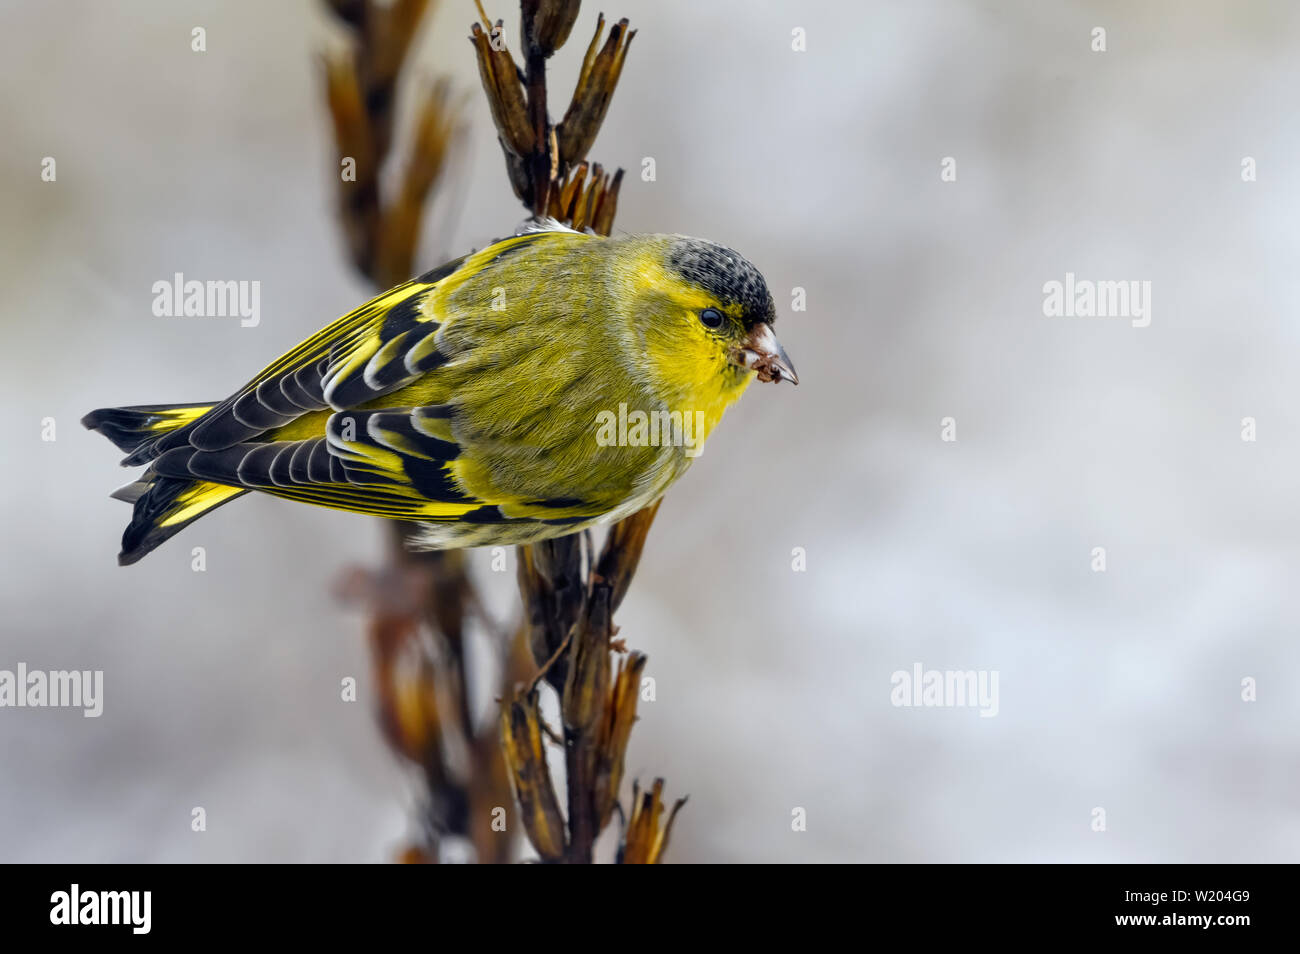 Male Eurasian Siskin back view perched on winter seed plant stem Stock Photo